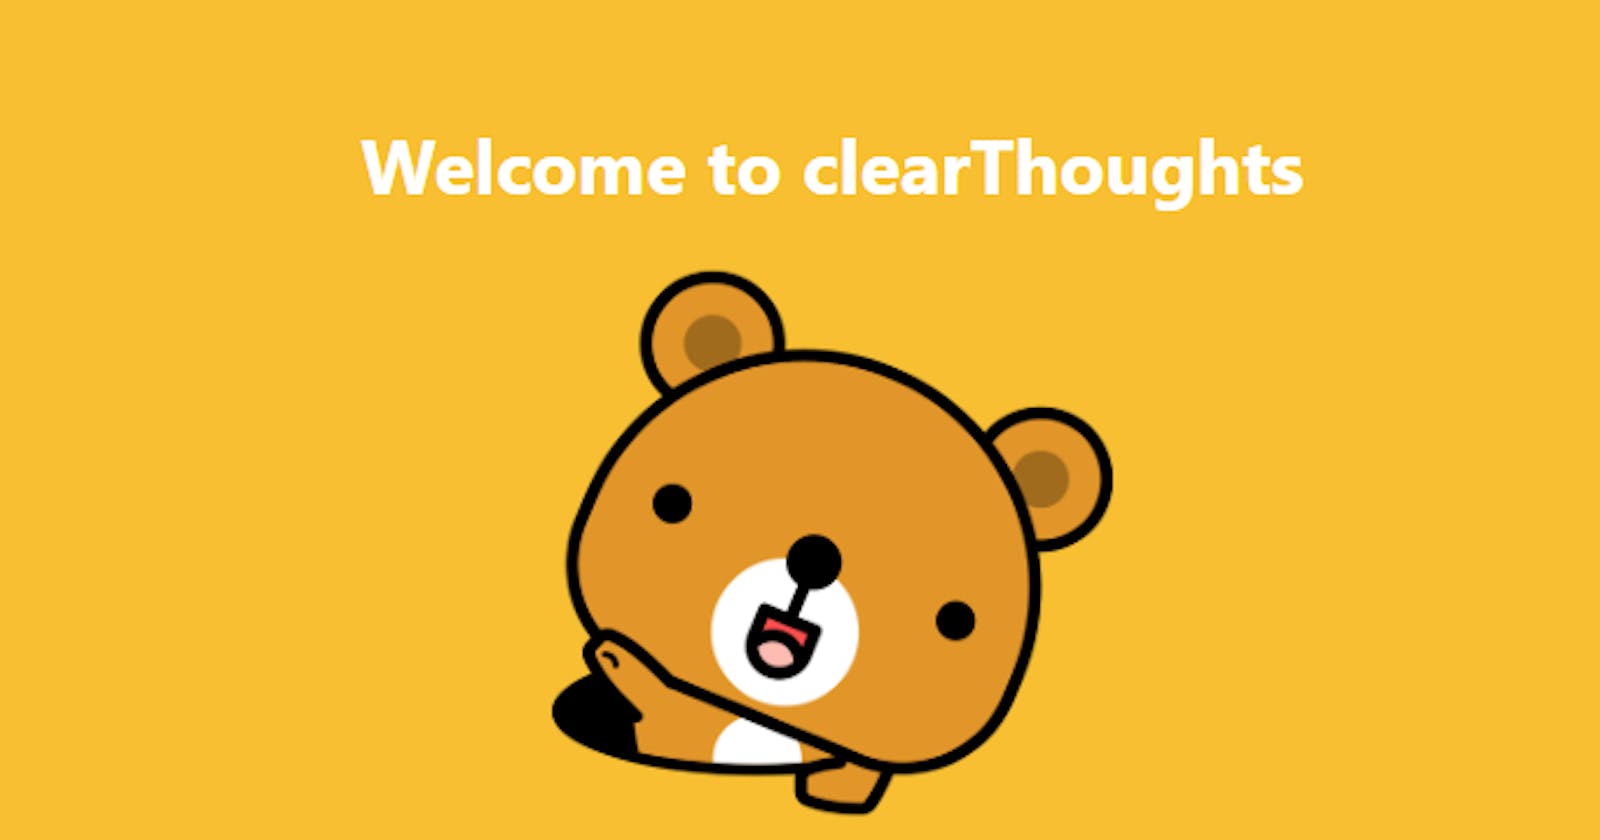 clearThoughts -  Express yourself more clearly, completely, and effectively